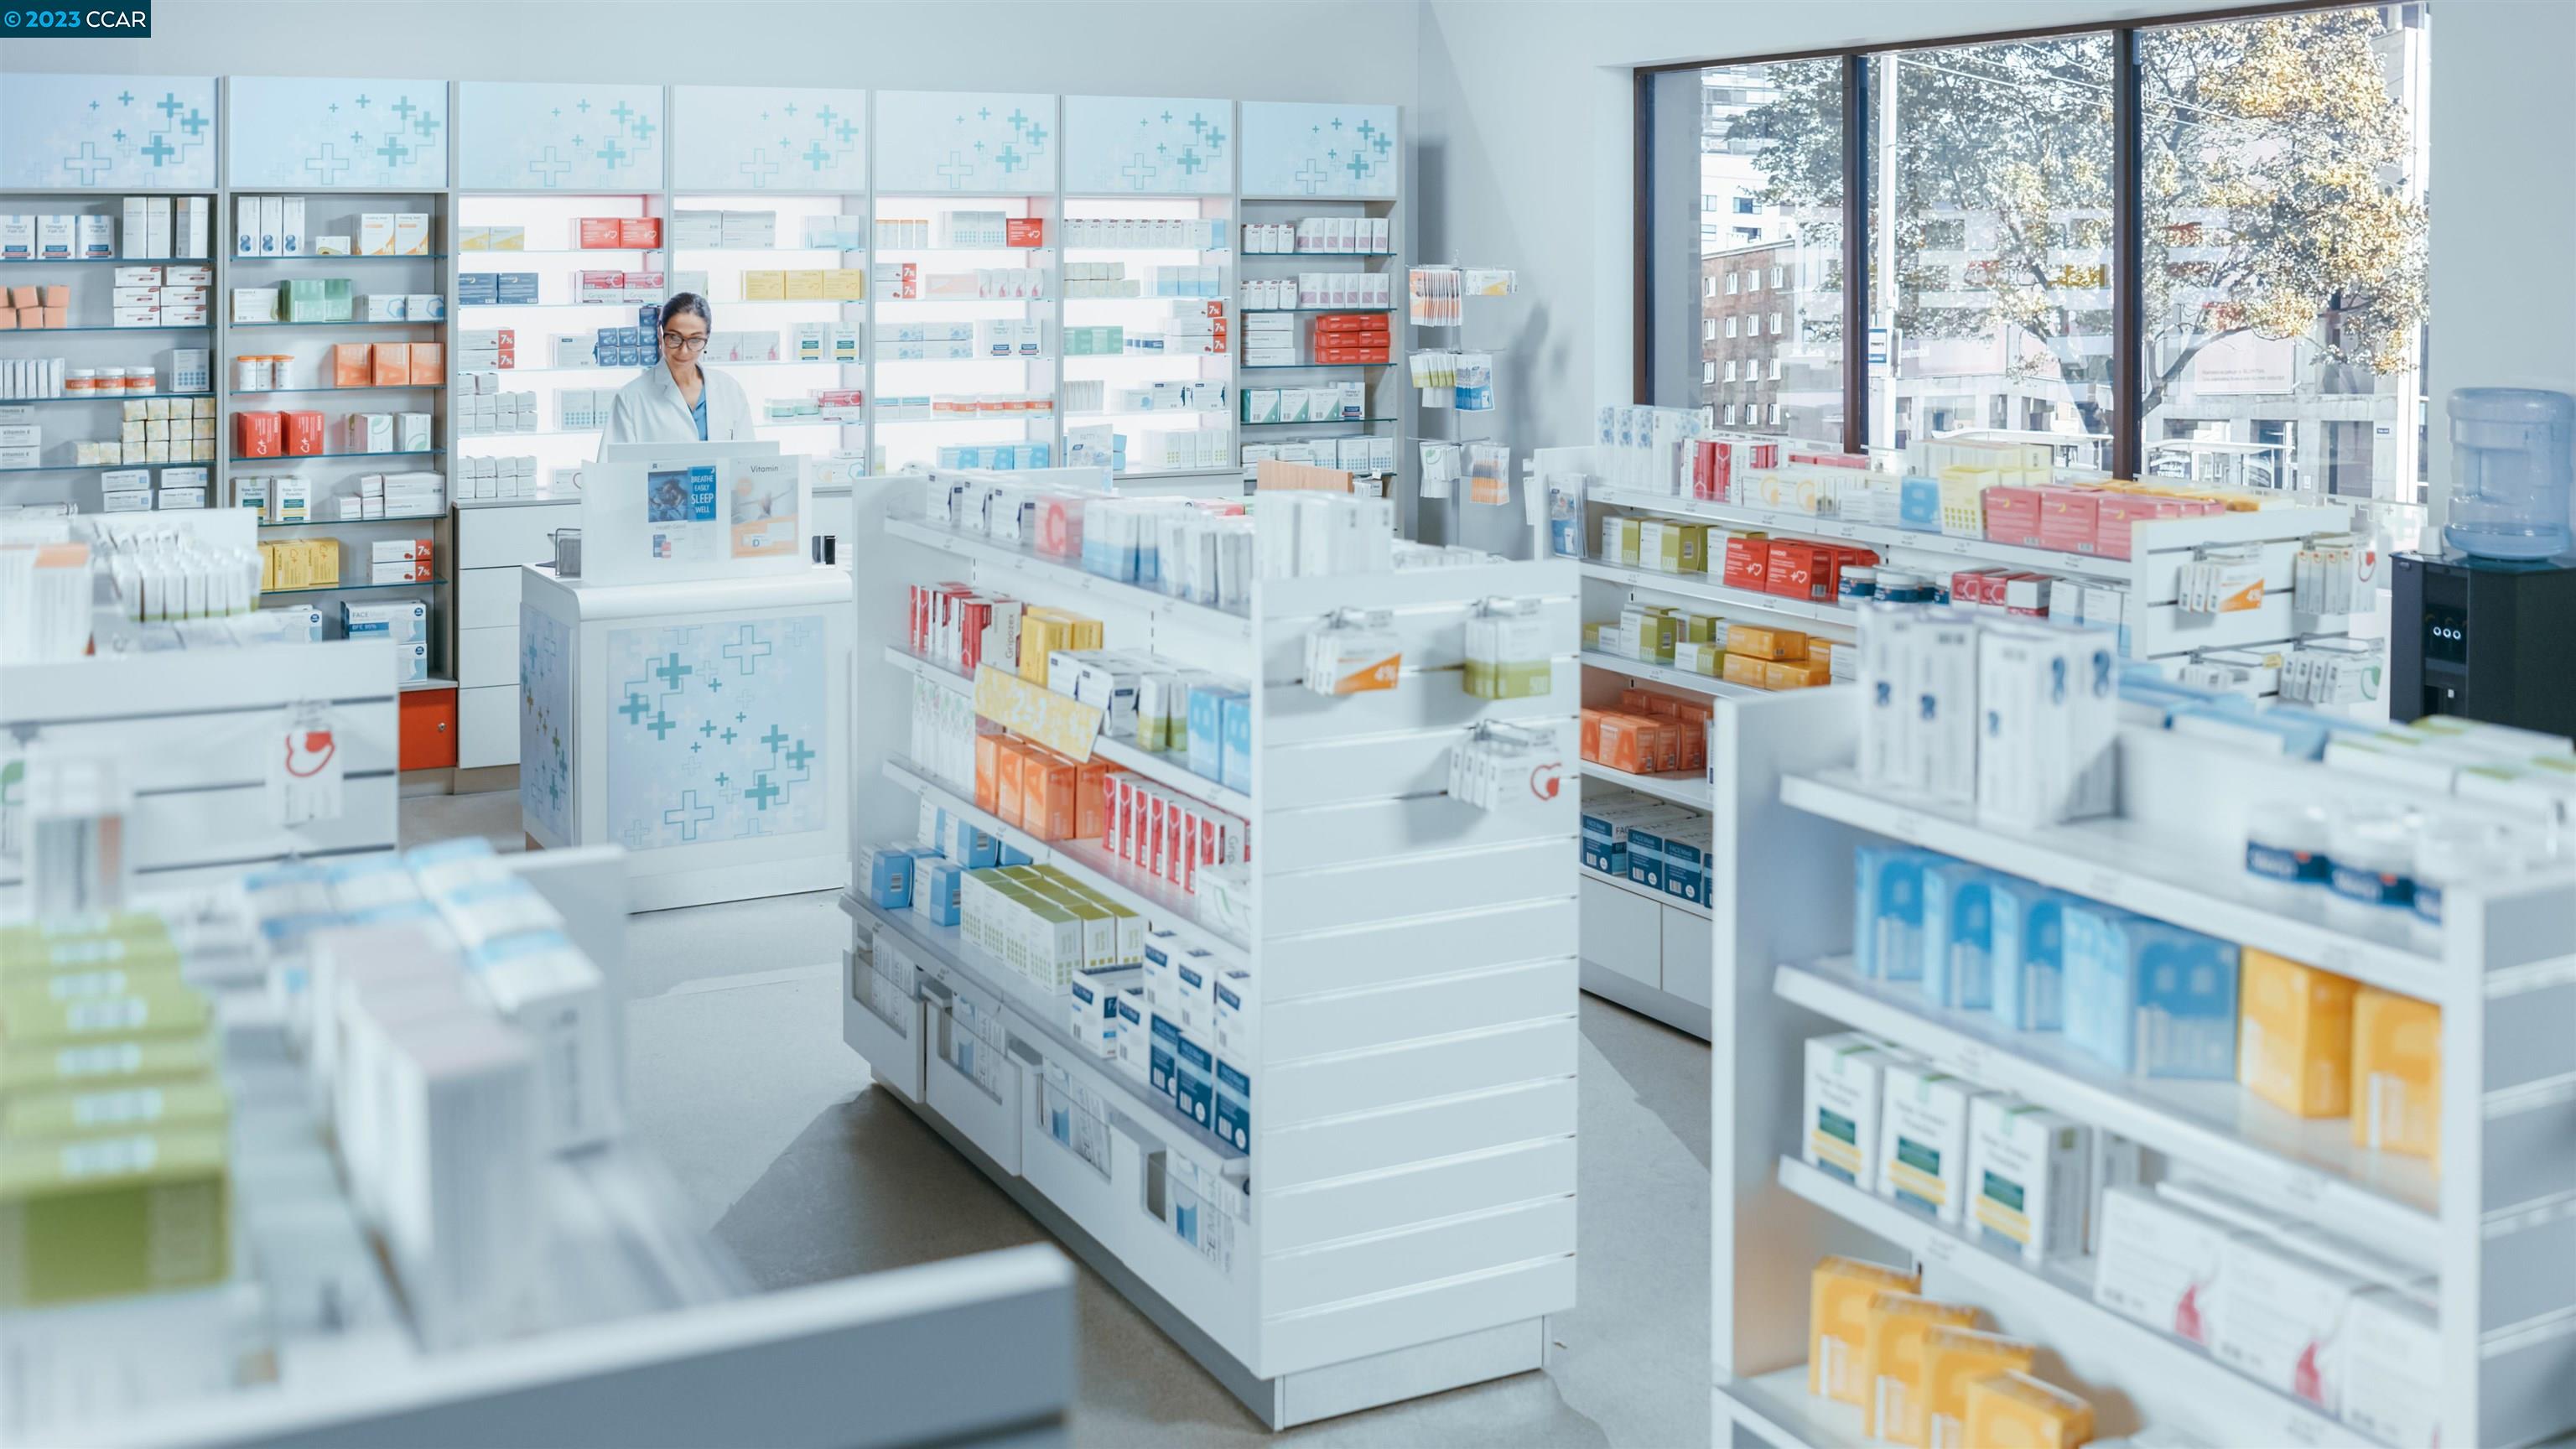 This highly profitable and well-established pharmacy business is for sale. Same owners have been running business for over 30 years and have a strong reputation for exceptional customer service, personalized care, and competitive pricing. This facility has established contracts with multiple LTC facilities with continued requests for expansion. With a loyal customer base and a prime location in a high-traffic area, this pharmacy is poised for continued success. The business offers a wide range of services, including prescription medications,OTC products, medical equipment and supplies. They also provide home delivery, medication synchronization, and a mobile app for easy prescription management.The business also serves as a USPS and UPS location, adding an additional stream of revenue.This highly profitable pharmacy has a strong financial history, with consistent revenue growth and healthy profit margins. The business is well-staffed with highly trained pharmacists and staff, allowing for a smooth transition of ownership. This is a turnkey pharmacy business with a proven track record of success. This business has met the initial eligibility requirements for an SBA loan.